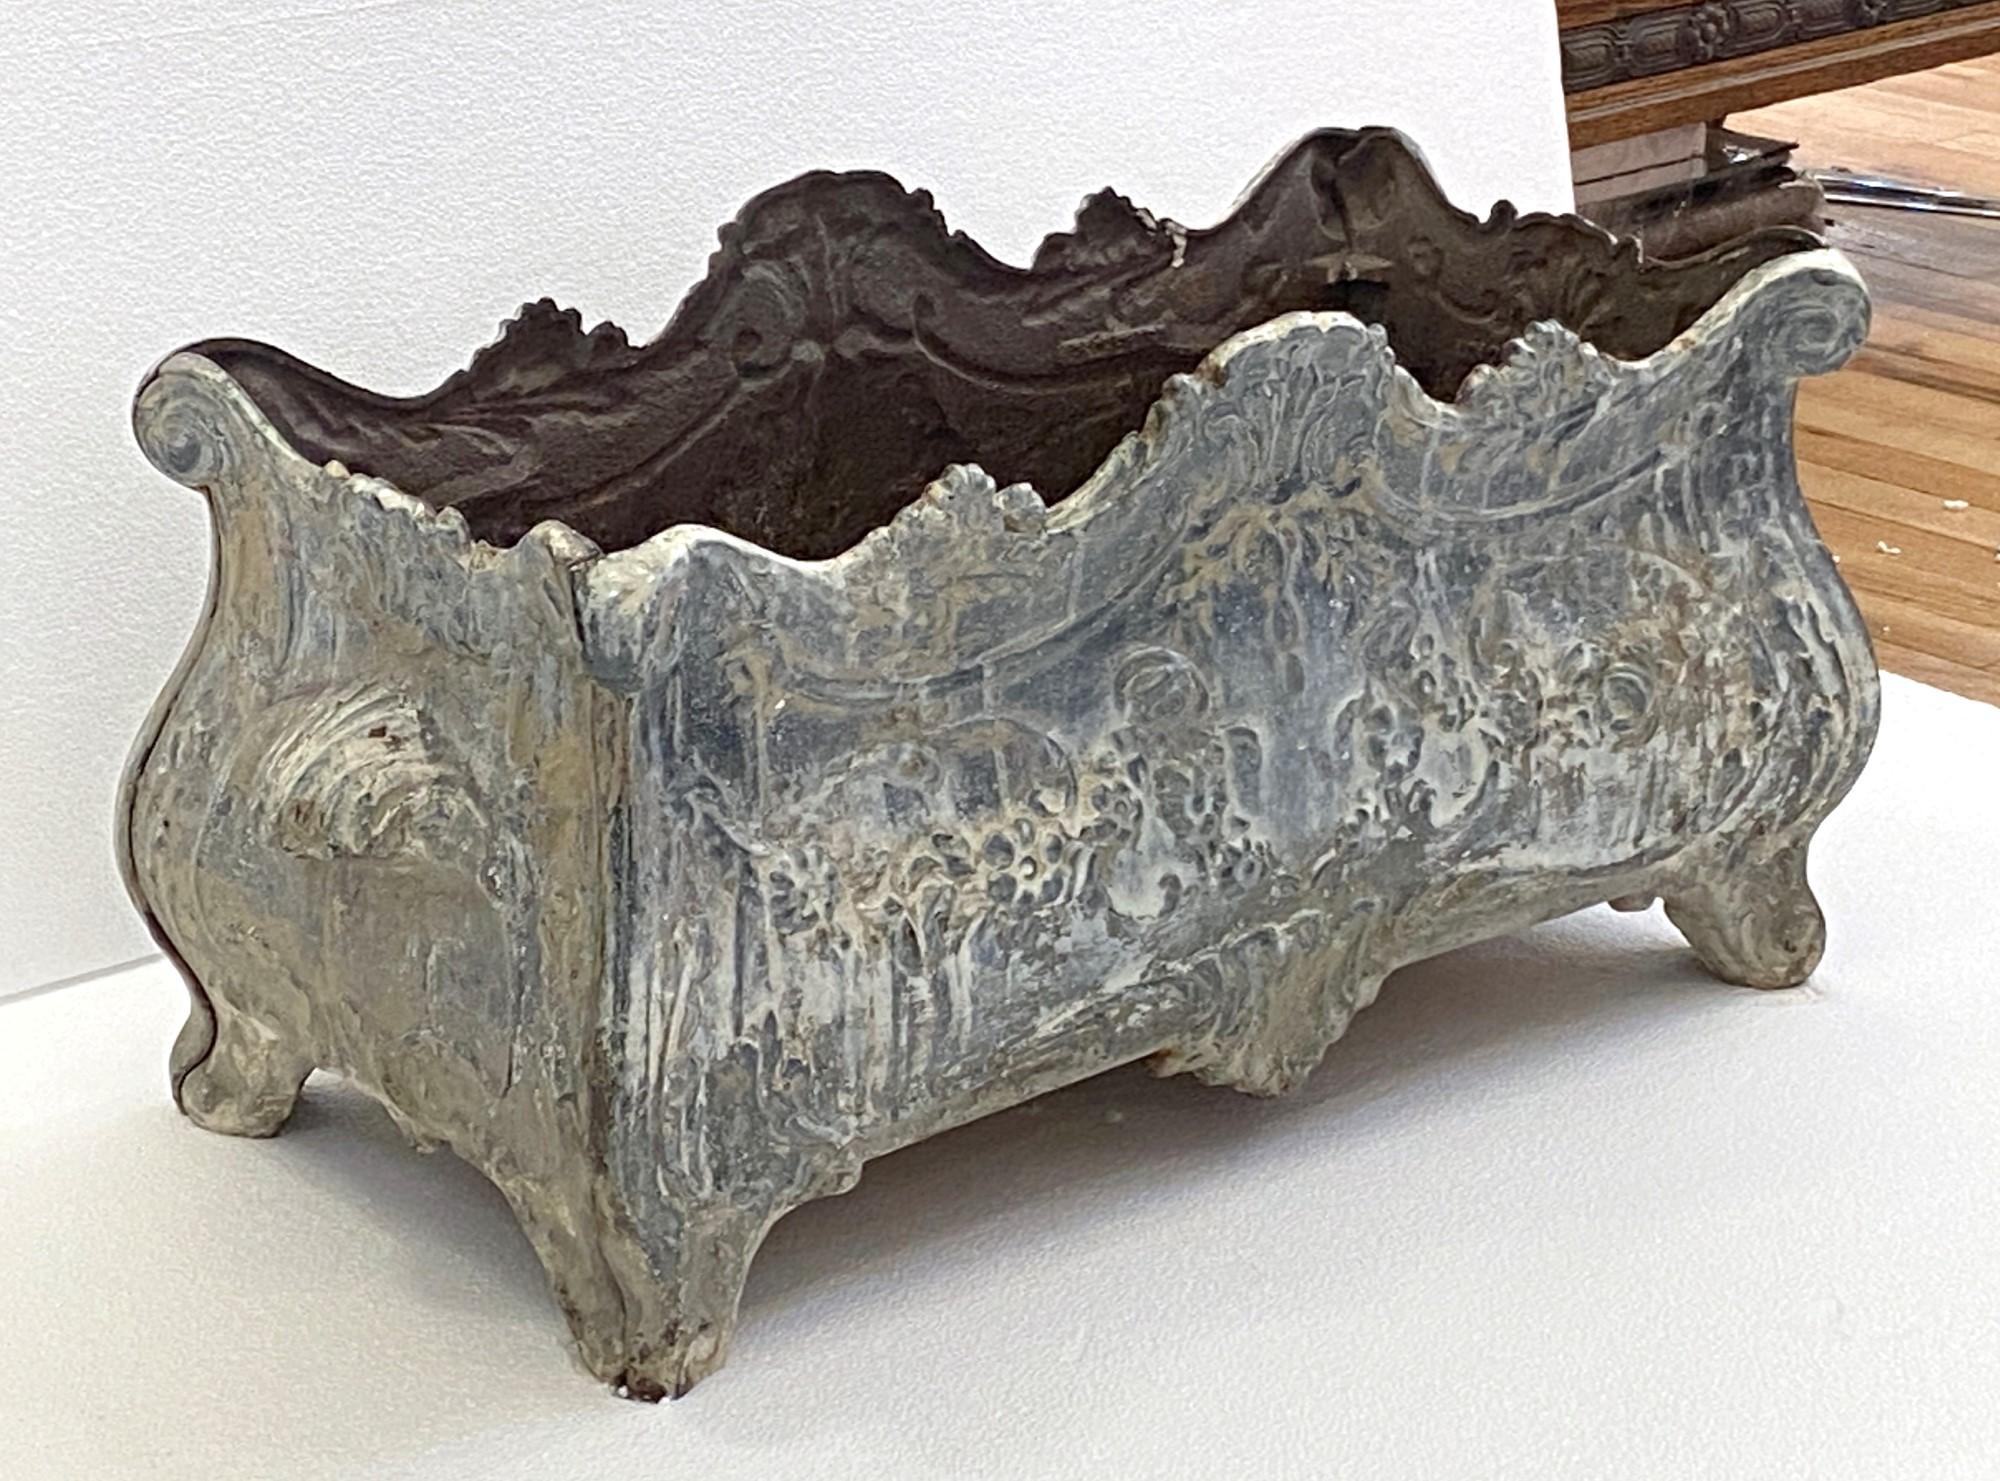 Late 18th century cast iron French planter with a foral design. Rectangular with the original patina. This can be seen at our 333 West 52nd St location in the Theater District West of Manhattan.